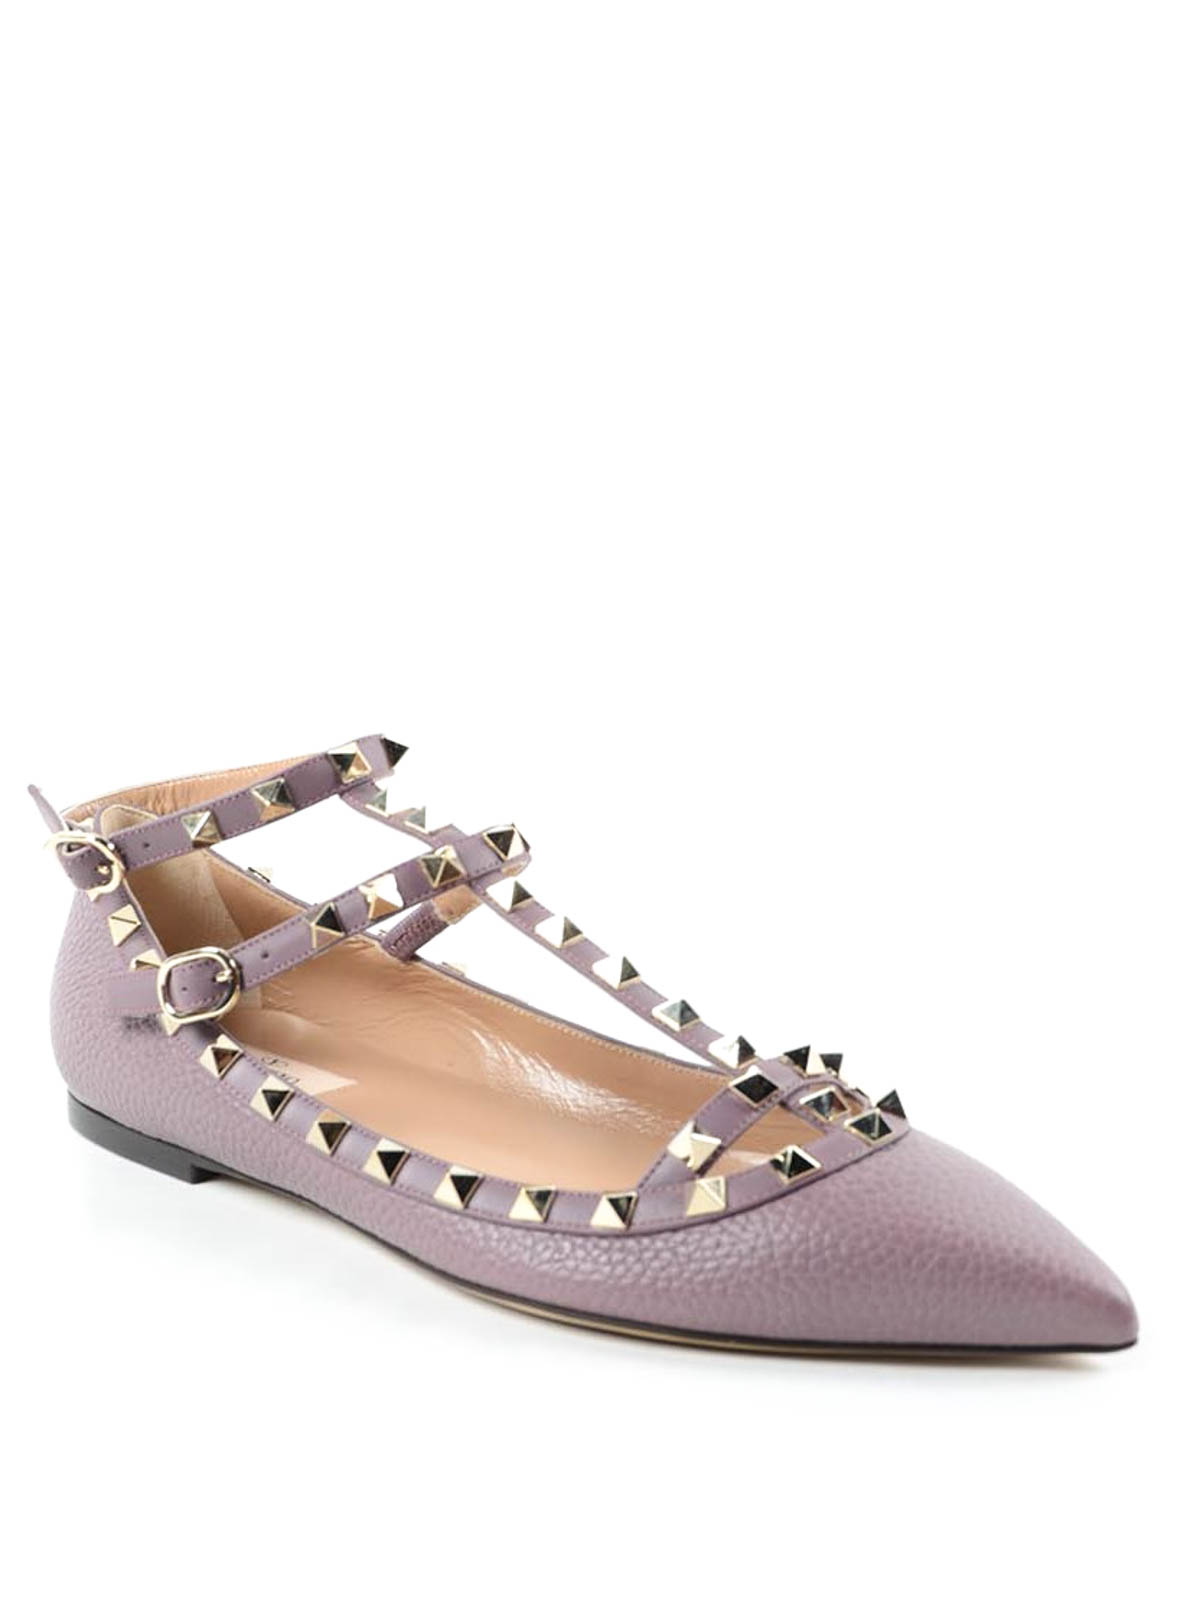 Valentino Rockstud Leather Flats (1 180 590 LBP) ❤ Liked On Polyvore Featuring Shoes, Flats, Gre… Leather Ballet Shoes, Grey Flats Shoes, Valentino Rockstud Flats |